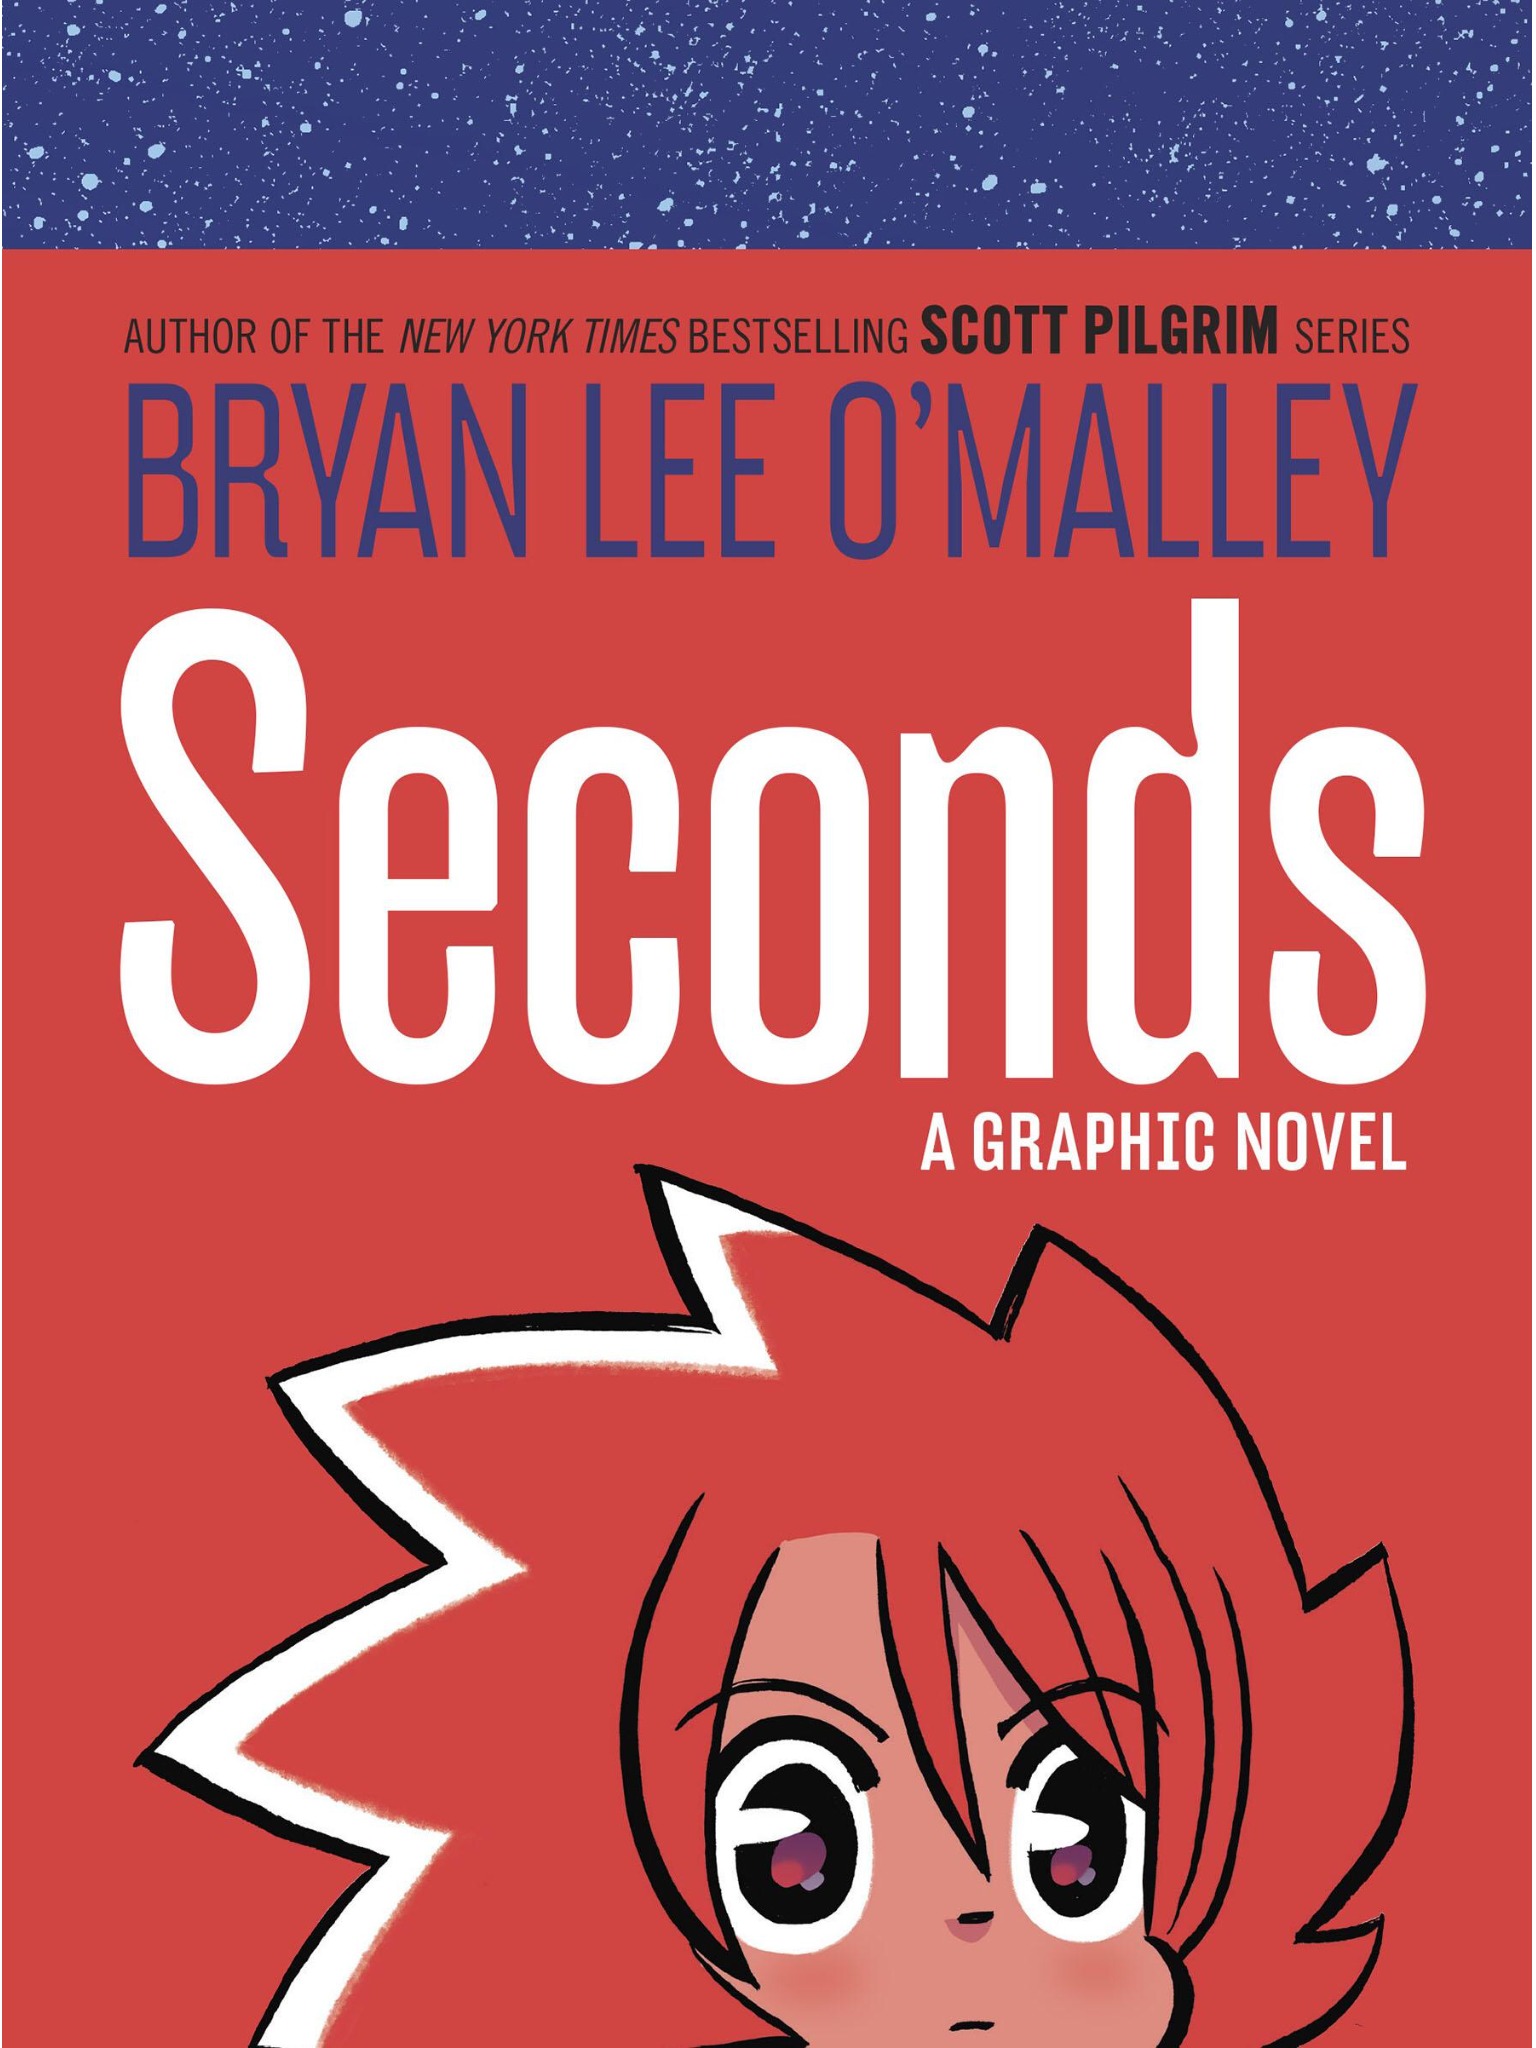 Read online Seconds comic -  Issue # Full - 1